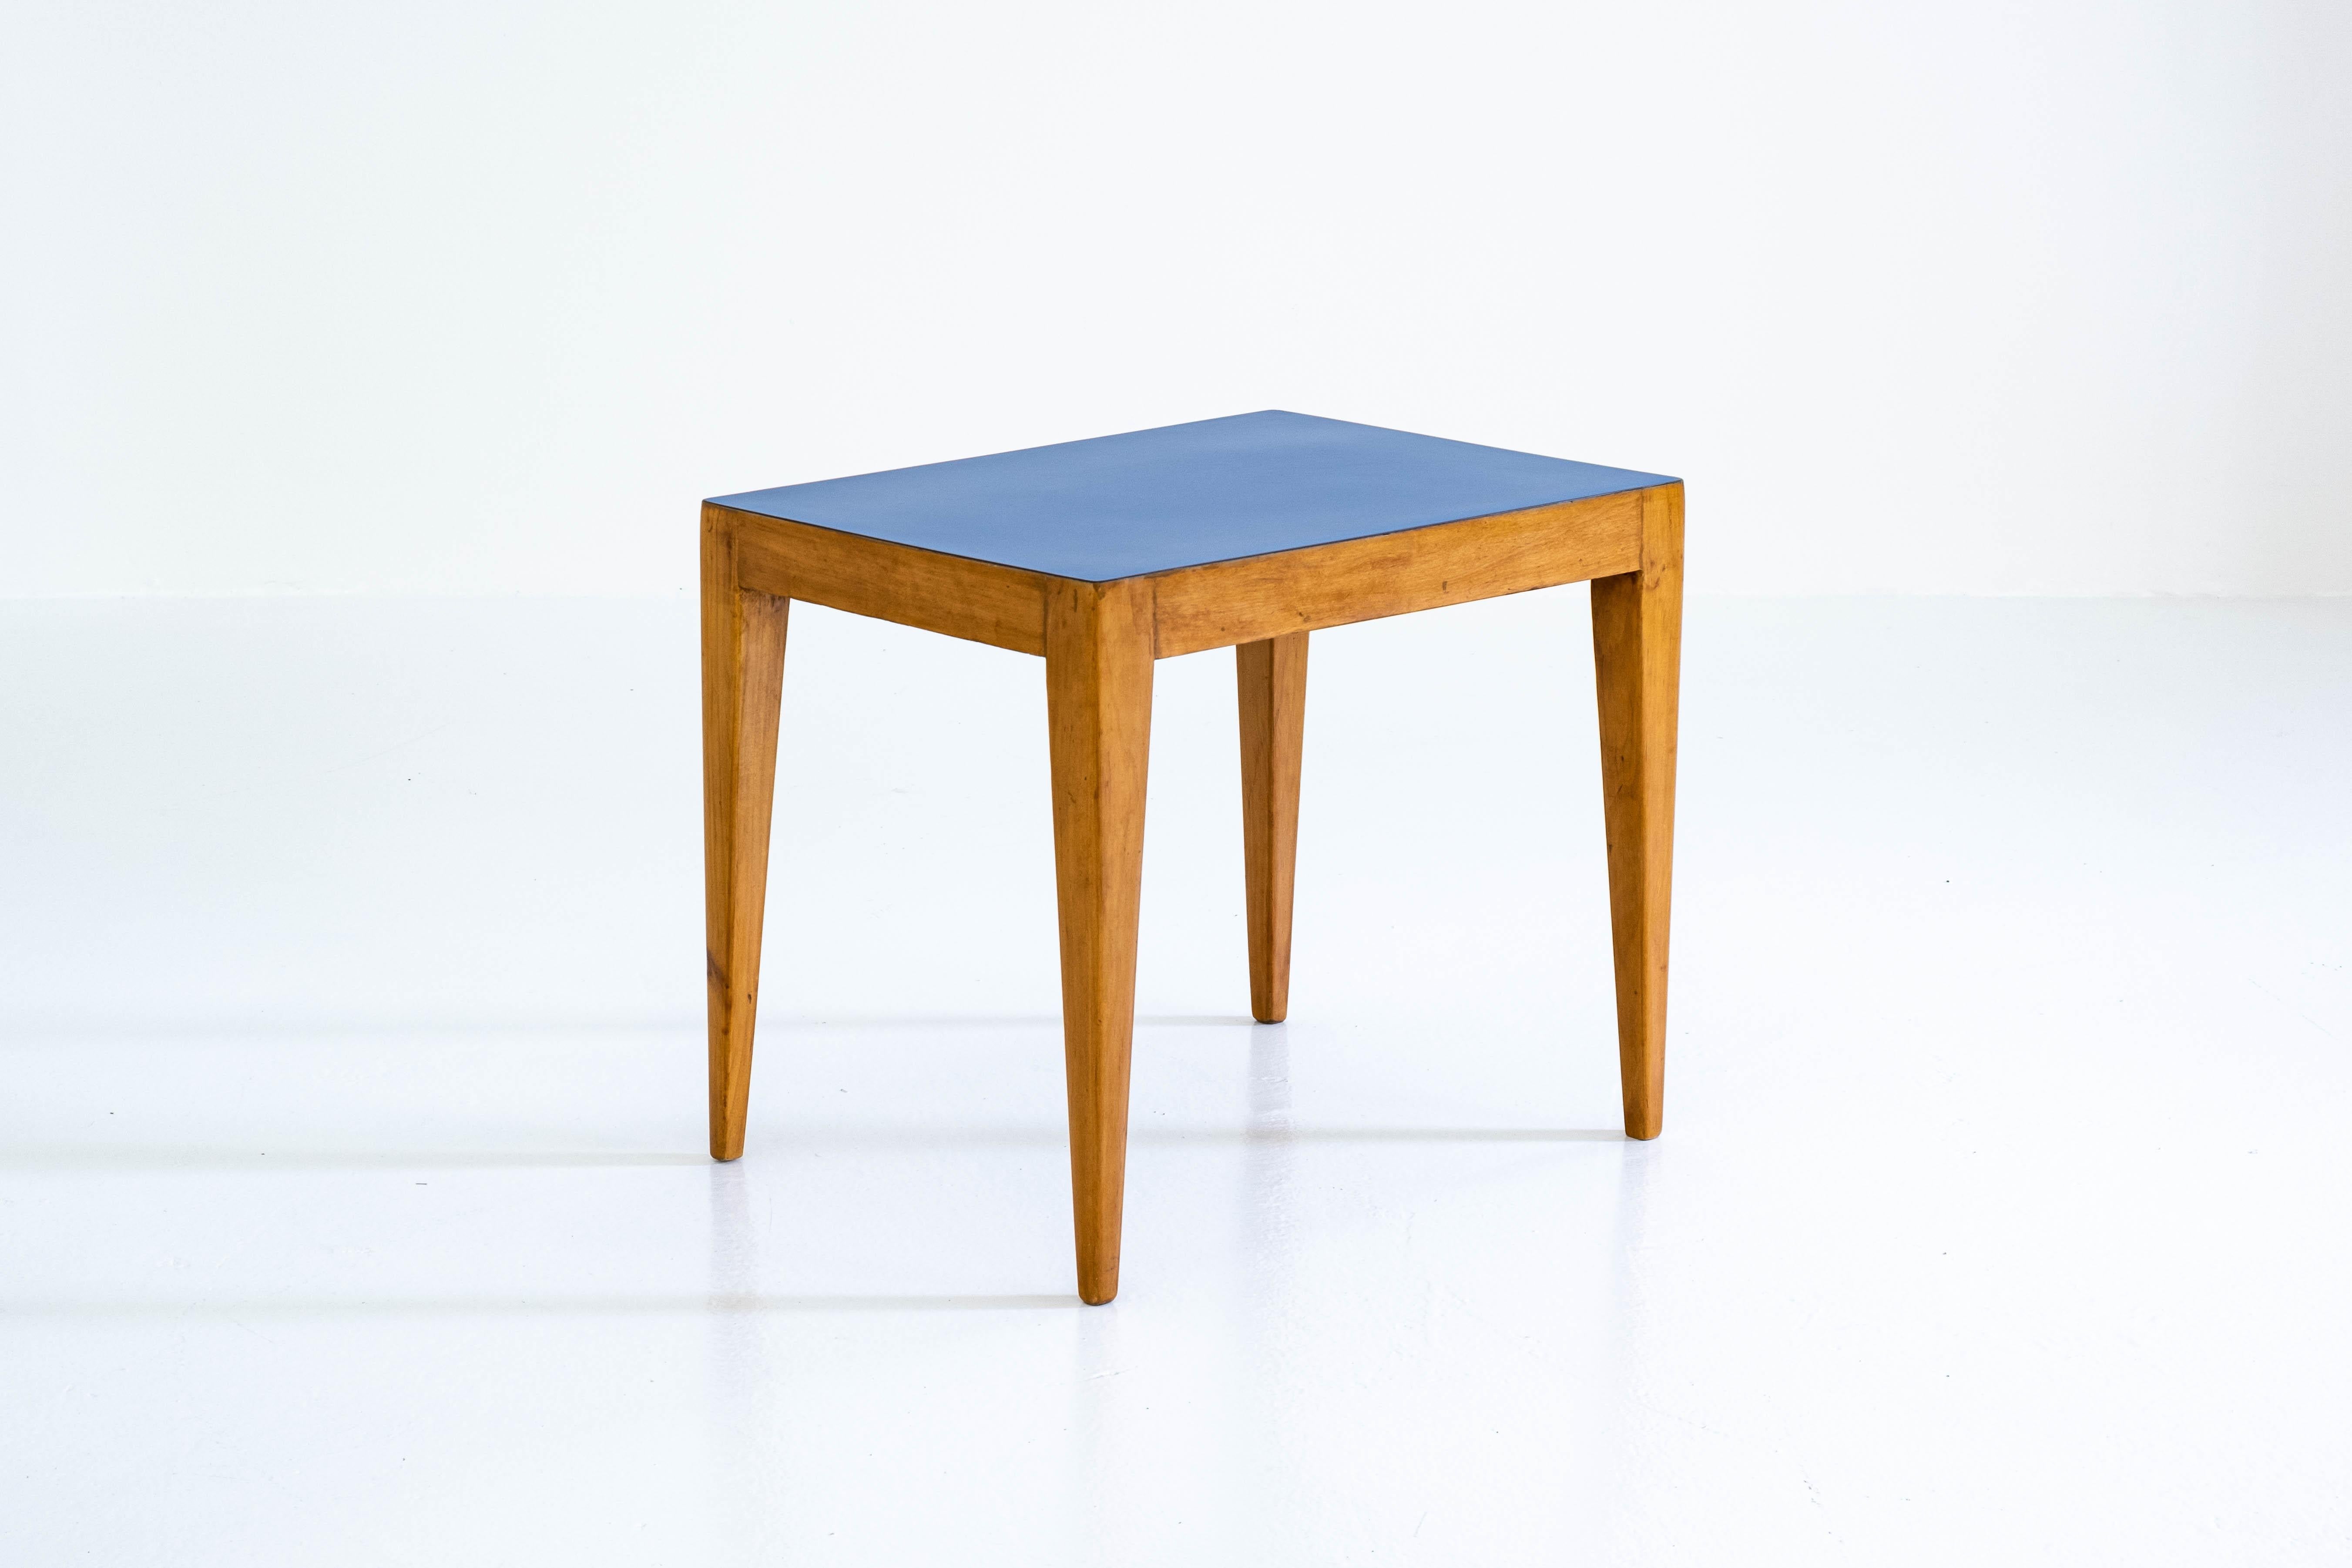 Italian Puristic, Mediterranean Blue Top, Side Table Attr. to Gio Ponti, Italy, 1960s